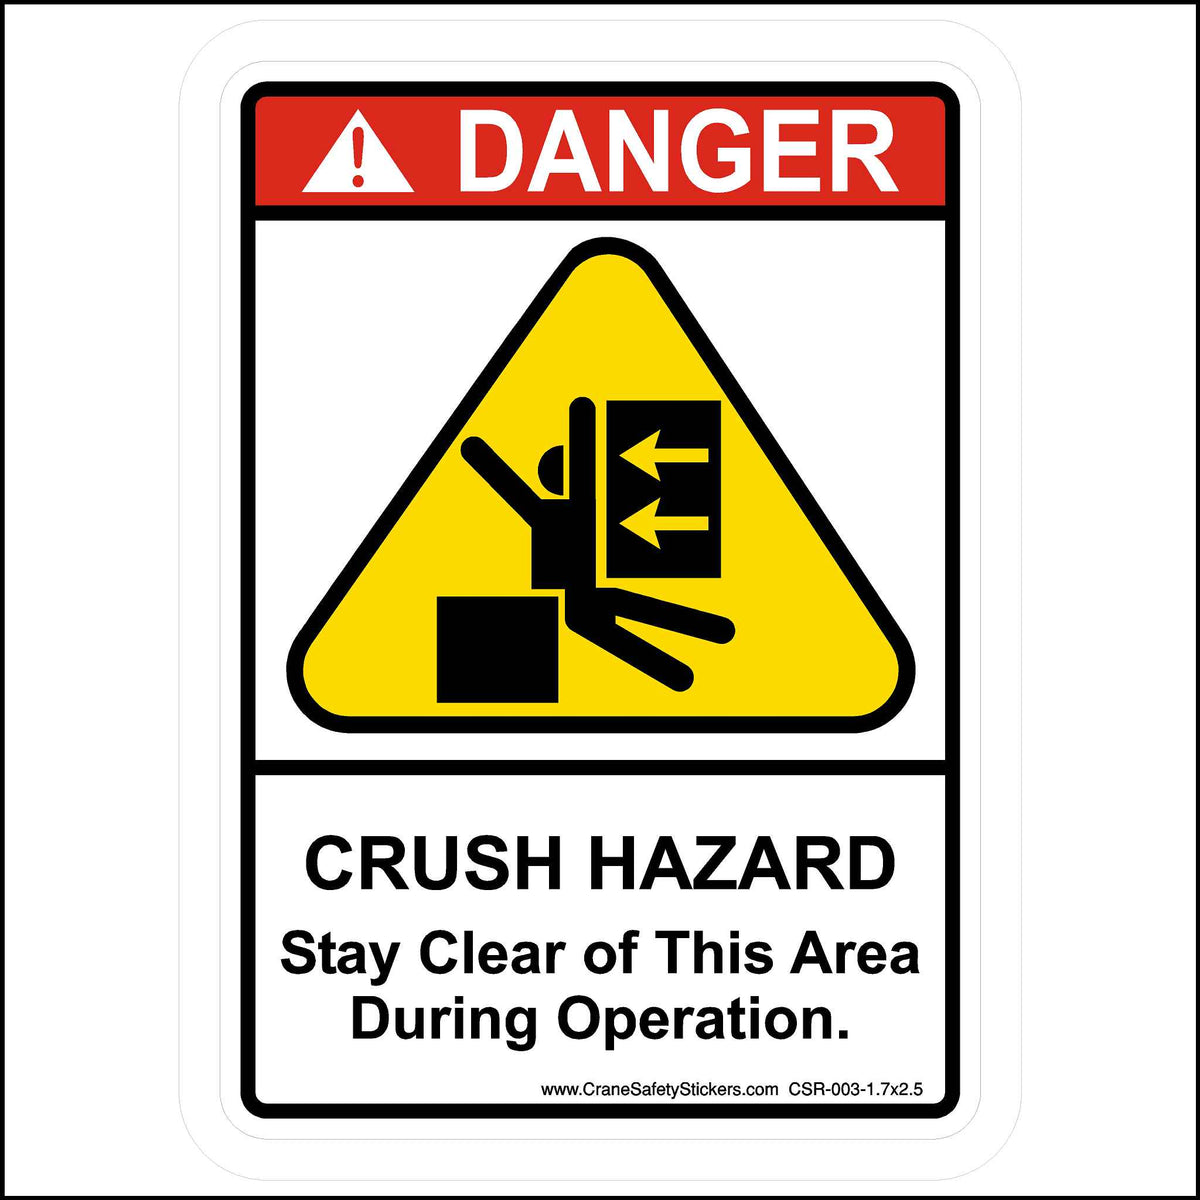 1 3/4 inch by 2 1/2 Inch Crane Sticker Printed With DANGER! CRUSH HAZARD, Stay Clear of This Area During Operation.